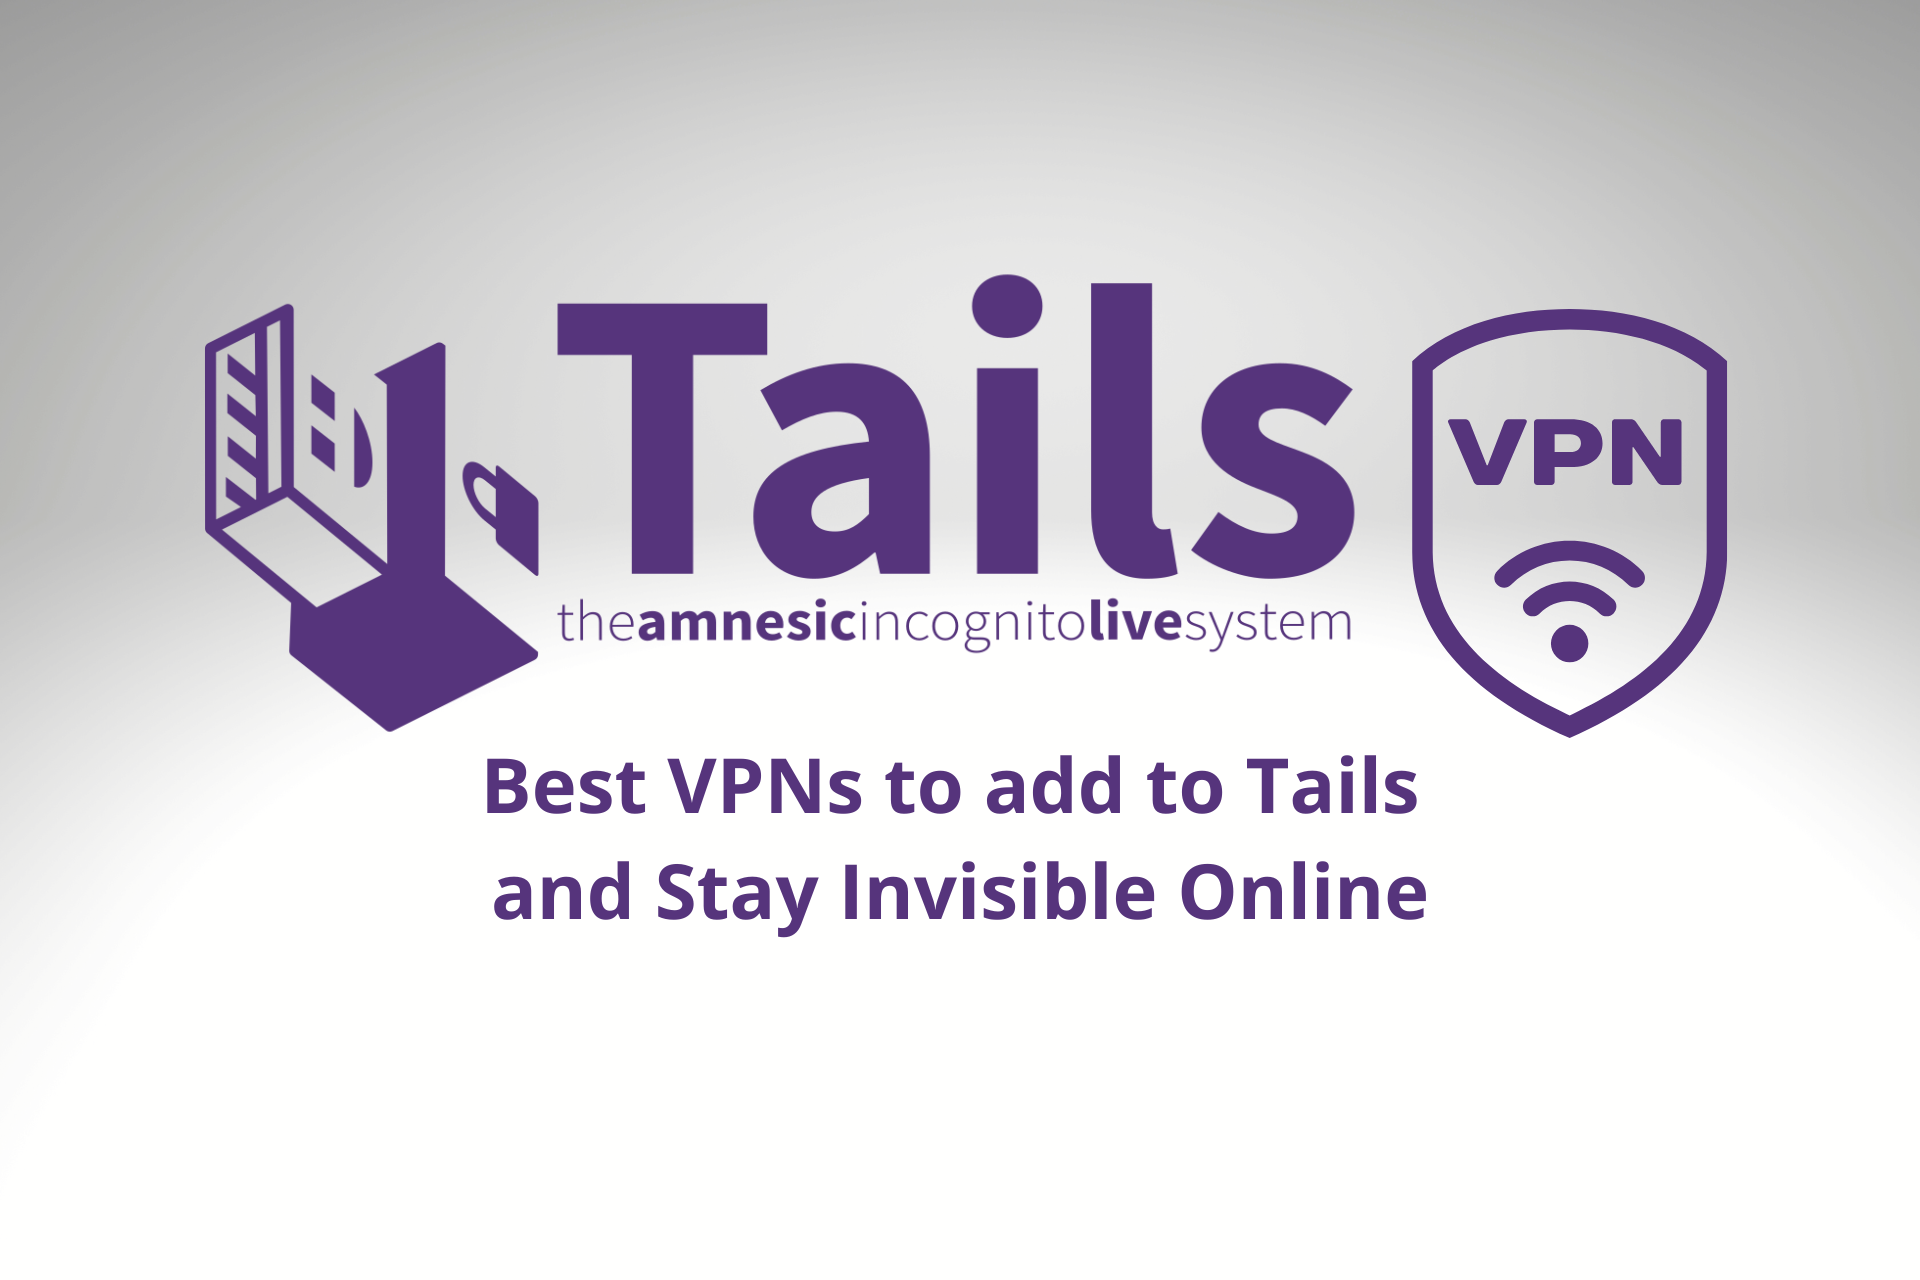 7 Best VPNs to Use With Tails and Stay Invisible